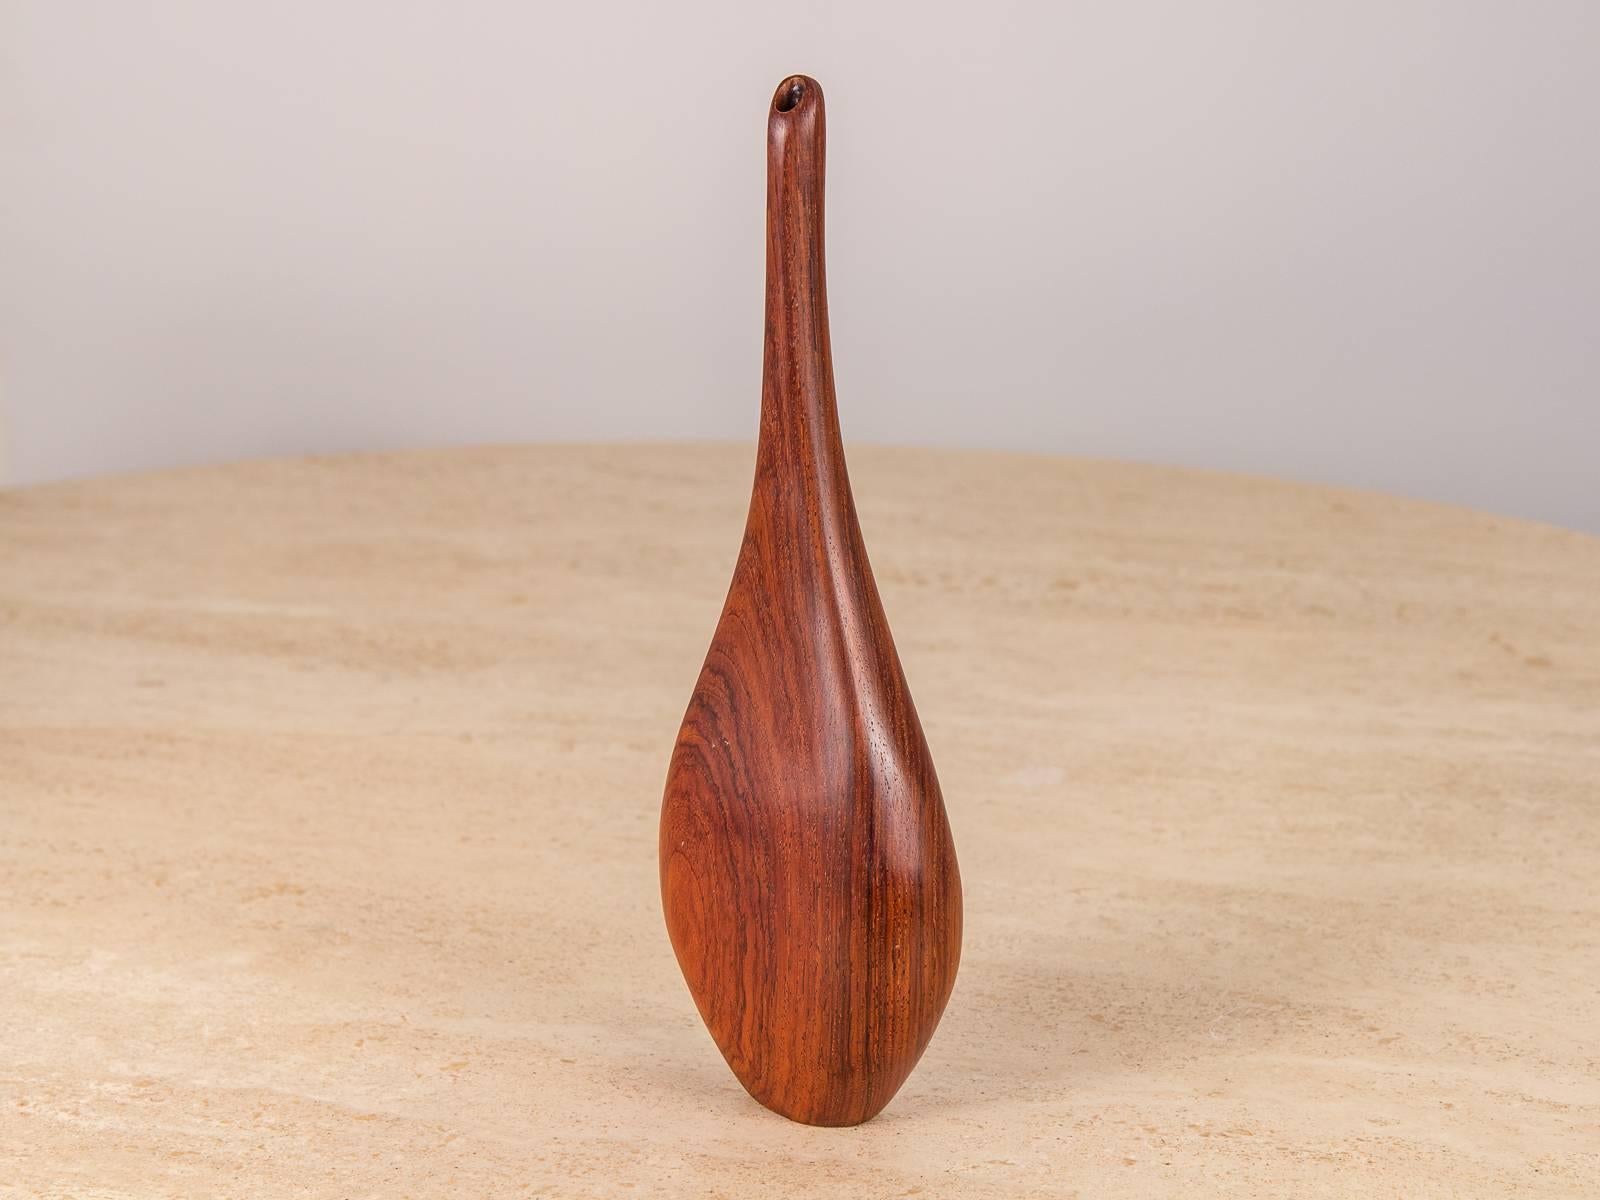 Elegantly sculpted Danish modern rosewood bud vase. 1.5” base delicately balances the curves of the pear shaped body up to the elongated neck. Gorgeous rosewood selection, with a very distinct grain. 1960s, unmarked.